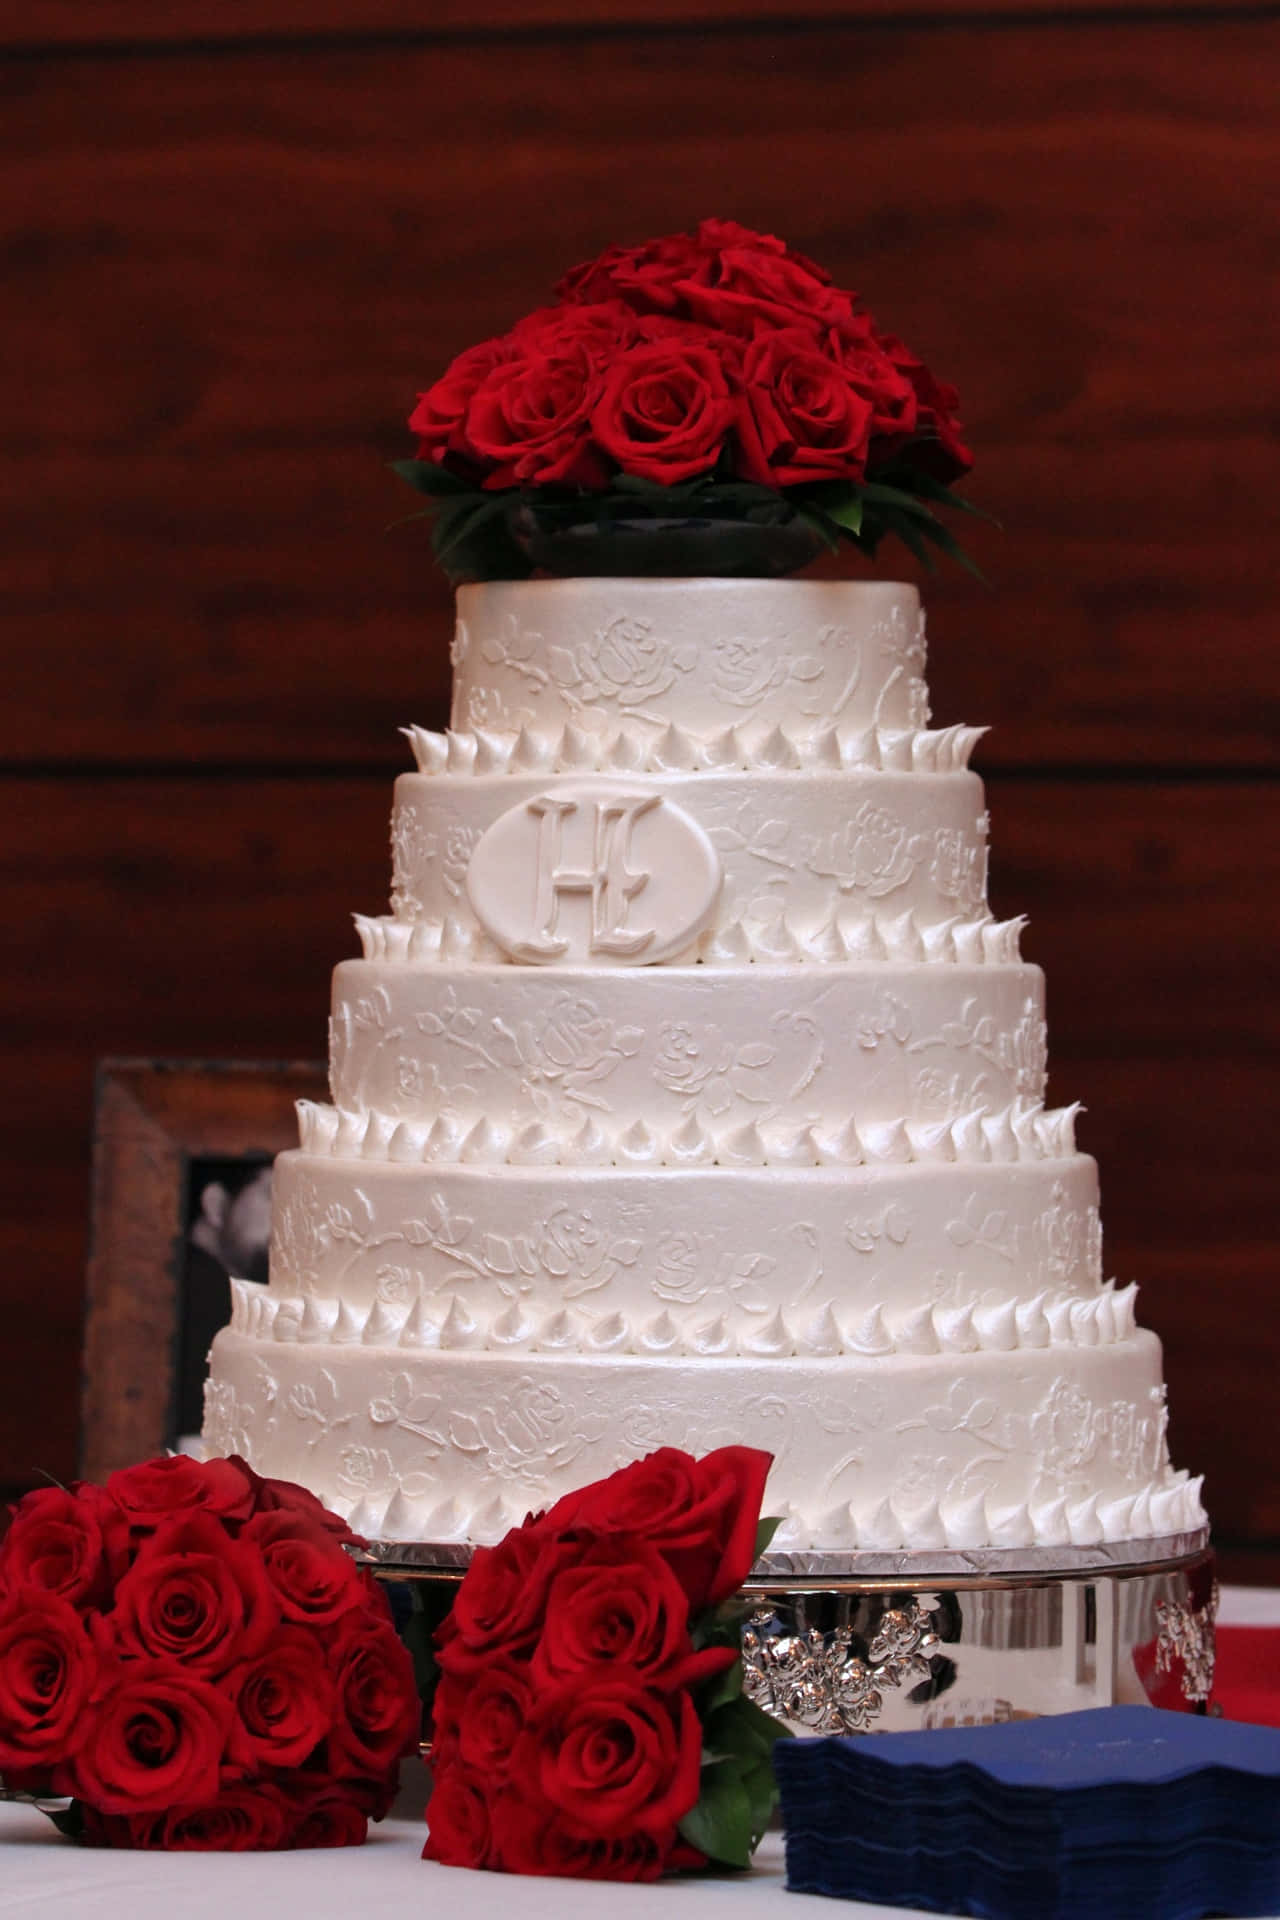 A White Wedding Cake With Red Roses On Top